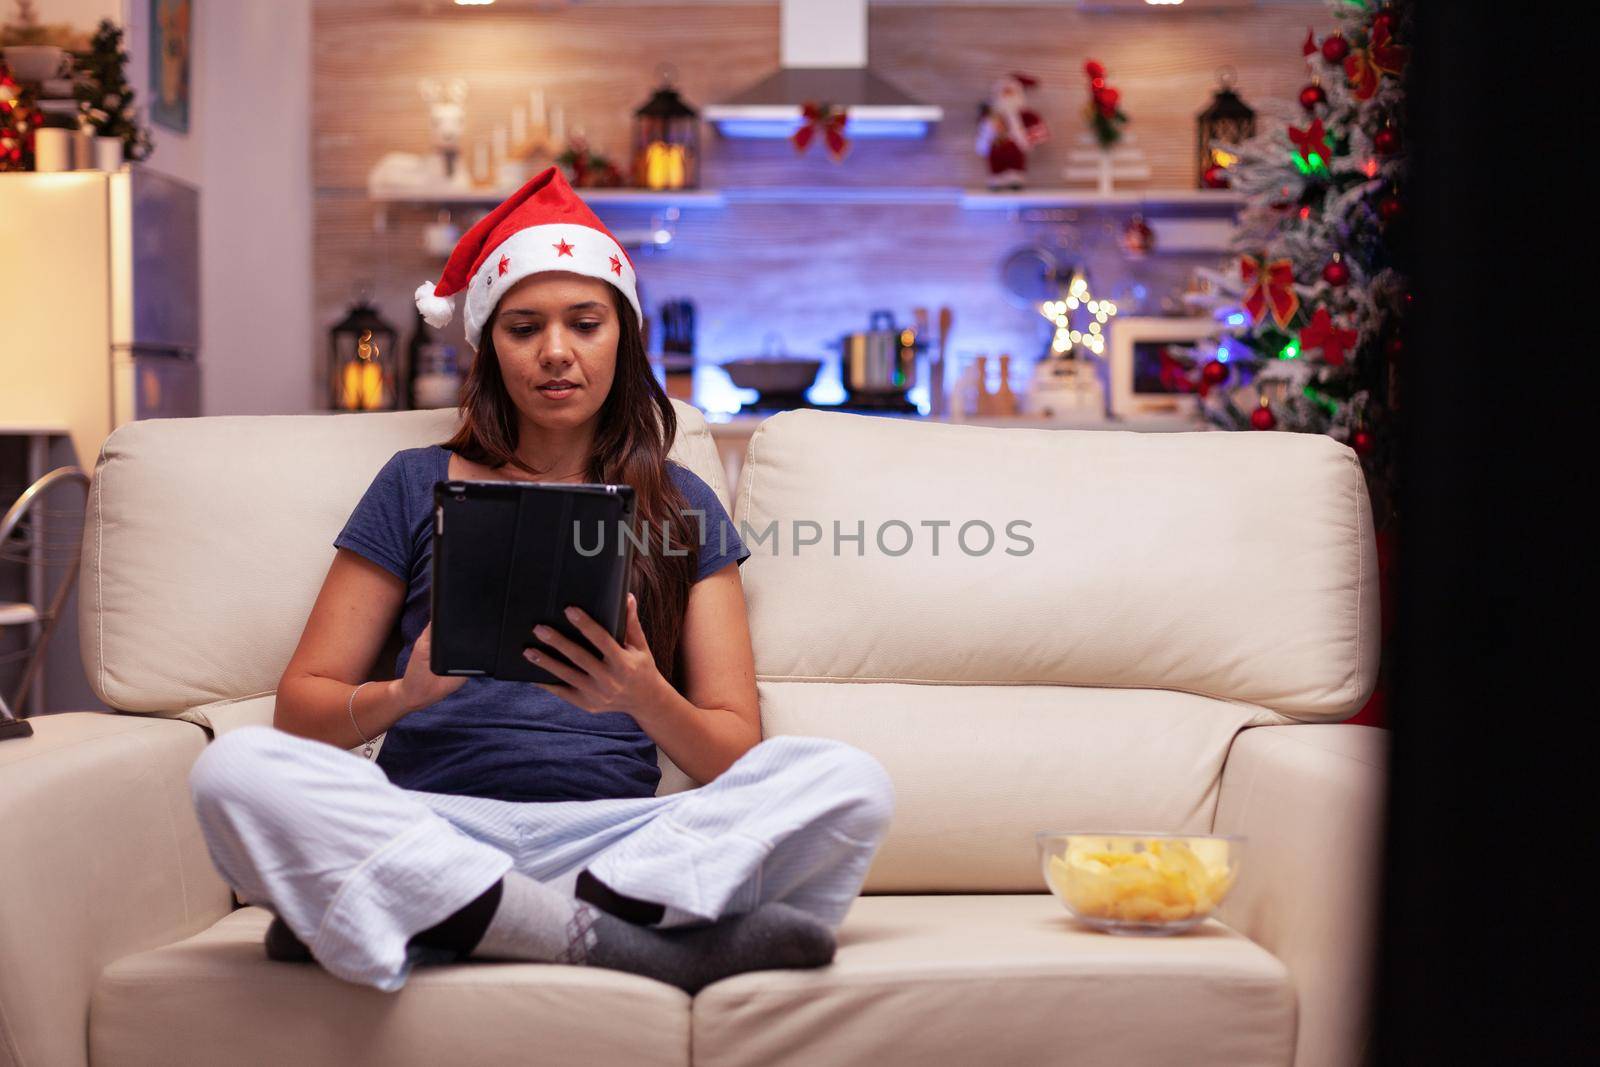 Adult relaxing in xmas decorated kitchen sitting in lotus position on couch by DCStudio